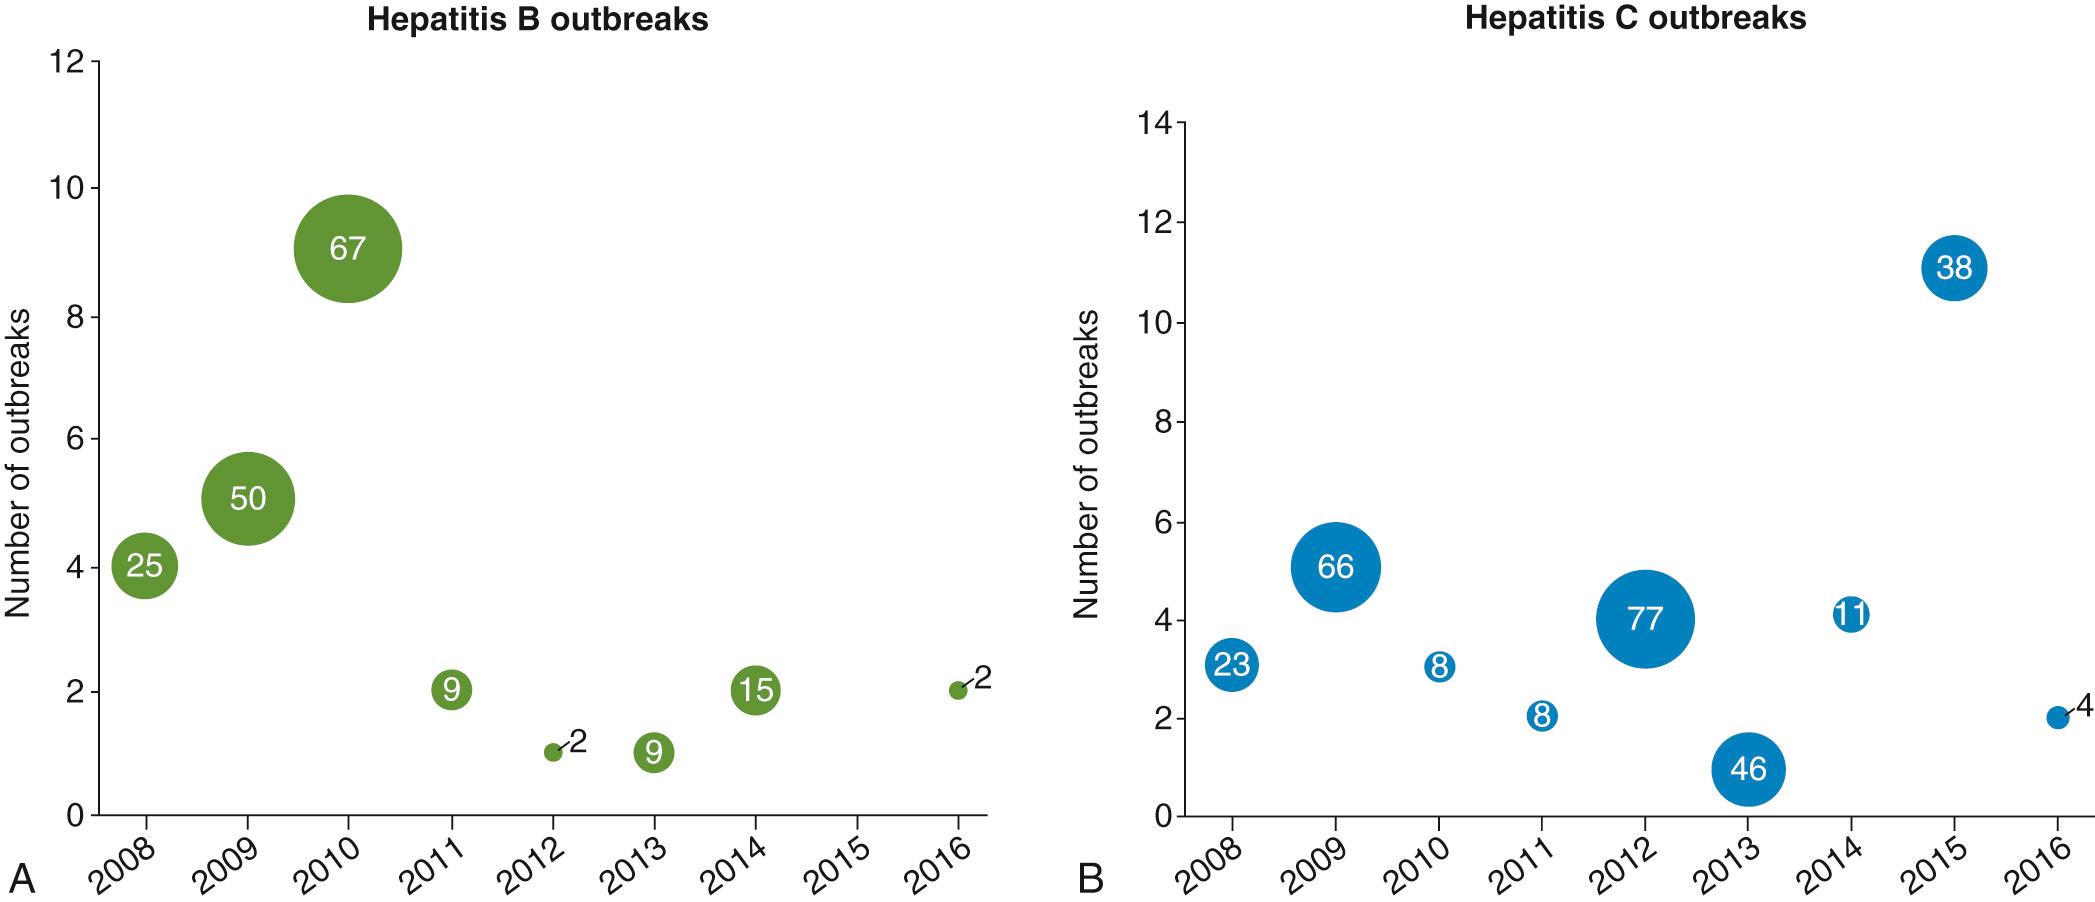 FIG. 303.1, (A and B) Hepatitis B and C outbreaks investigated between 2008 and 2016.